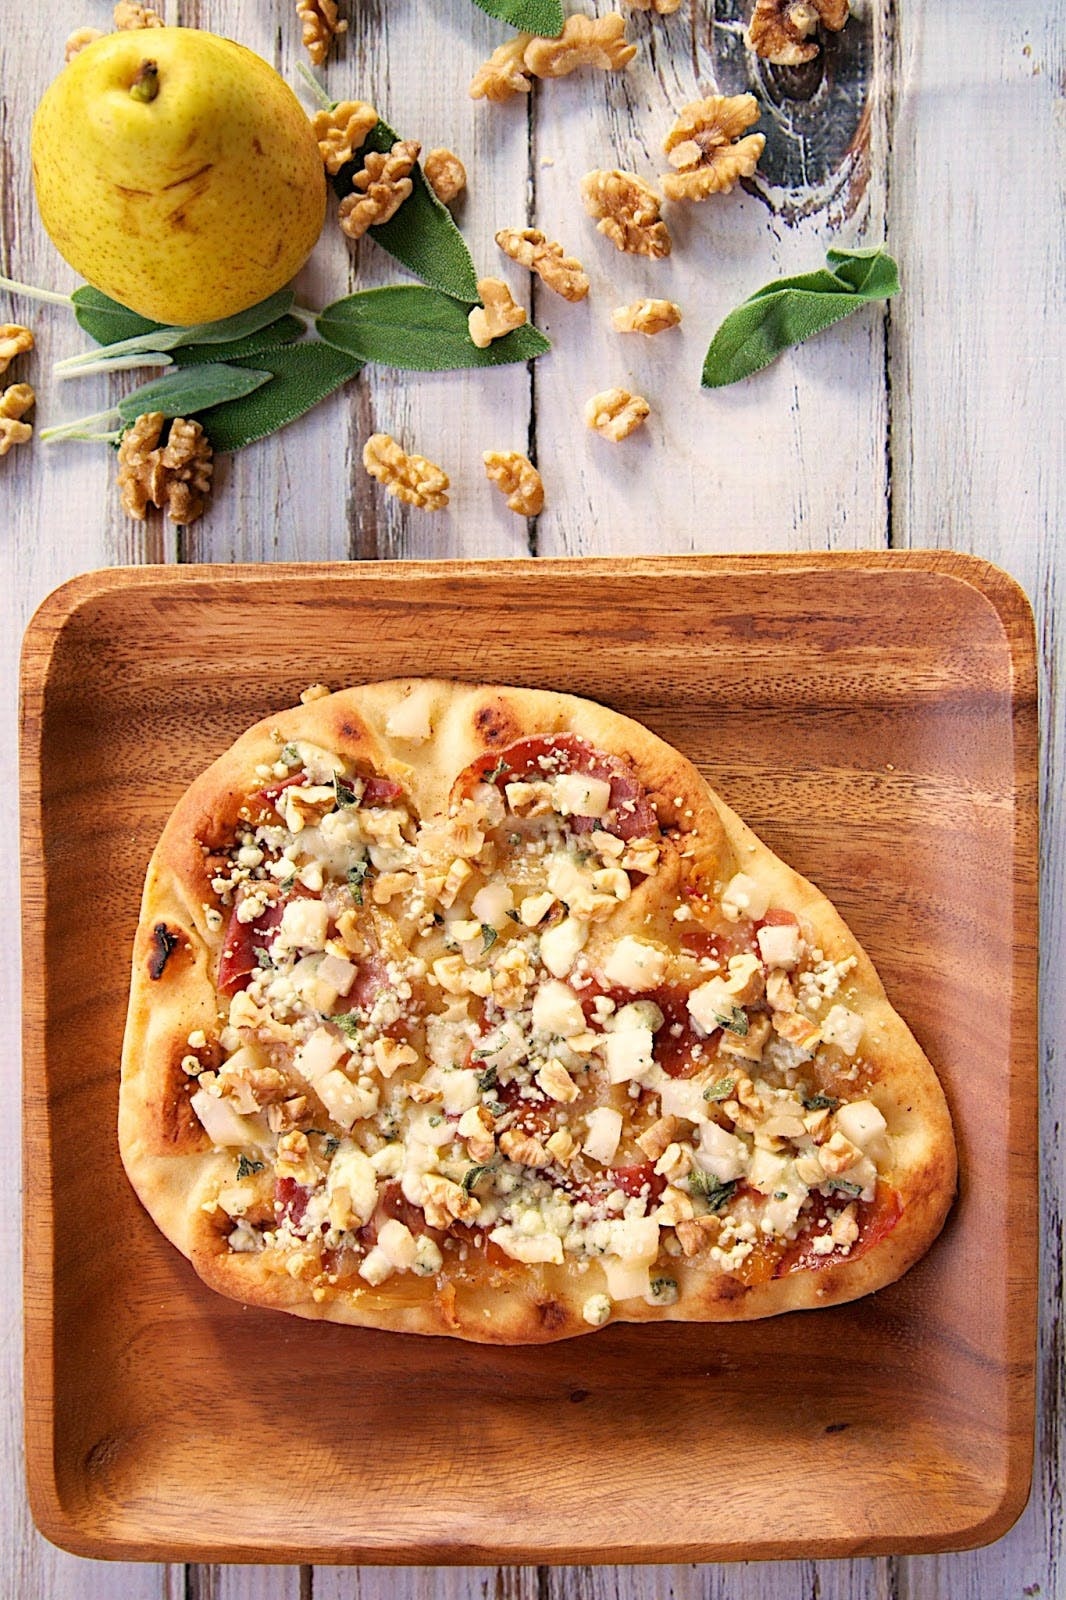 The combination of sweet <a href="https://www.brit.co/pear-recipes/"><strong>pears</strong></a> with salty blue cheese and prosciutto (on a piece of naan) makes this a toaster-oven lunch you’ll crave even after you’re done eating it. (via <strong><a href="https://www.plainchicken.com/2015/05/pear-gorgonzola-flatbread.html">Plain Chicken</a></strong>)